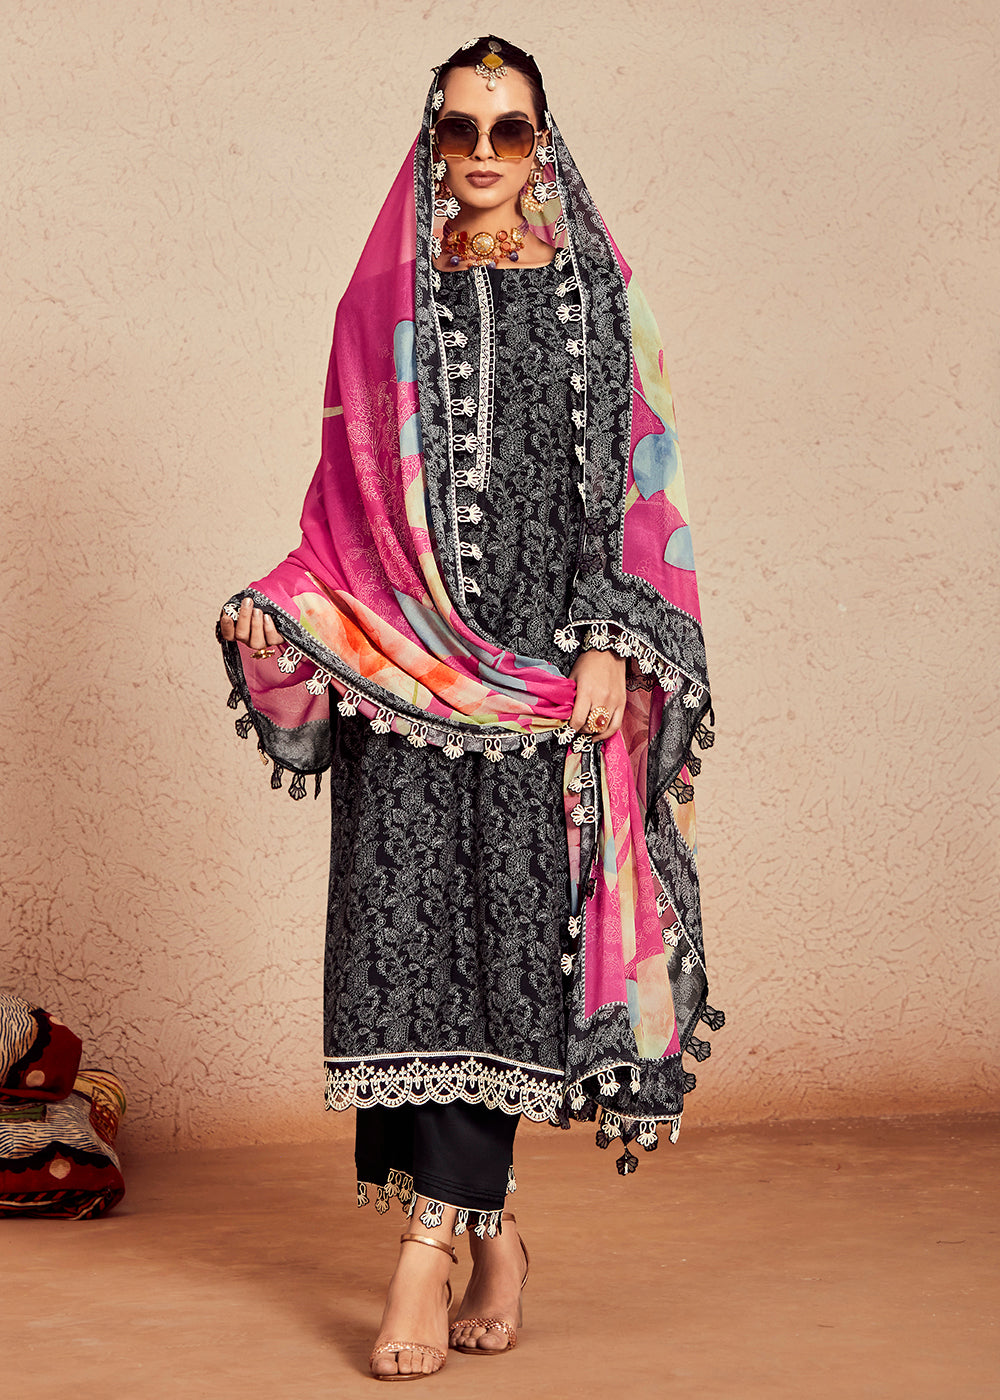 Buy Now Muslin Cotton Digital Print & Embroidered Black Salwar Suit Online in USA, UK, Canada, Germany, Australia & Worldwide at Empress Clothing. 